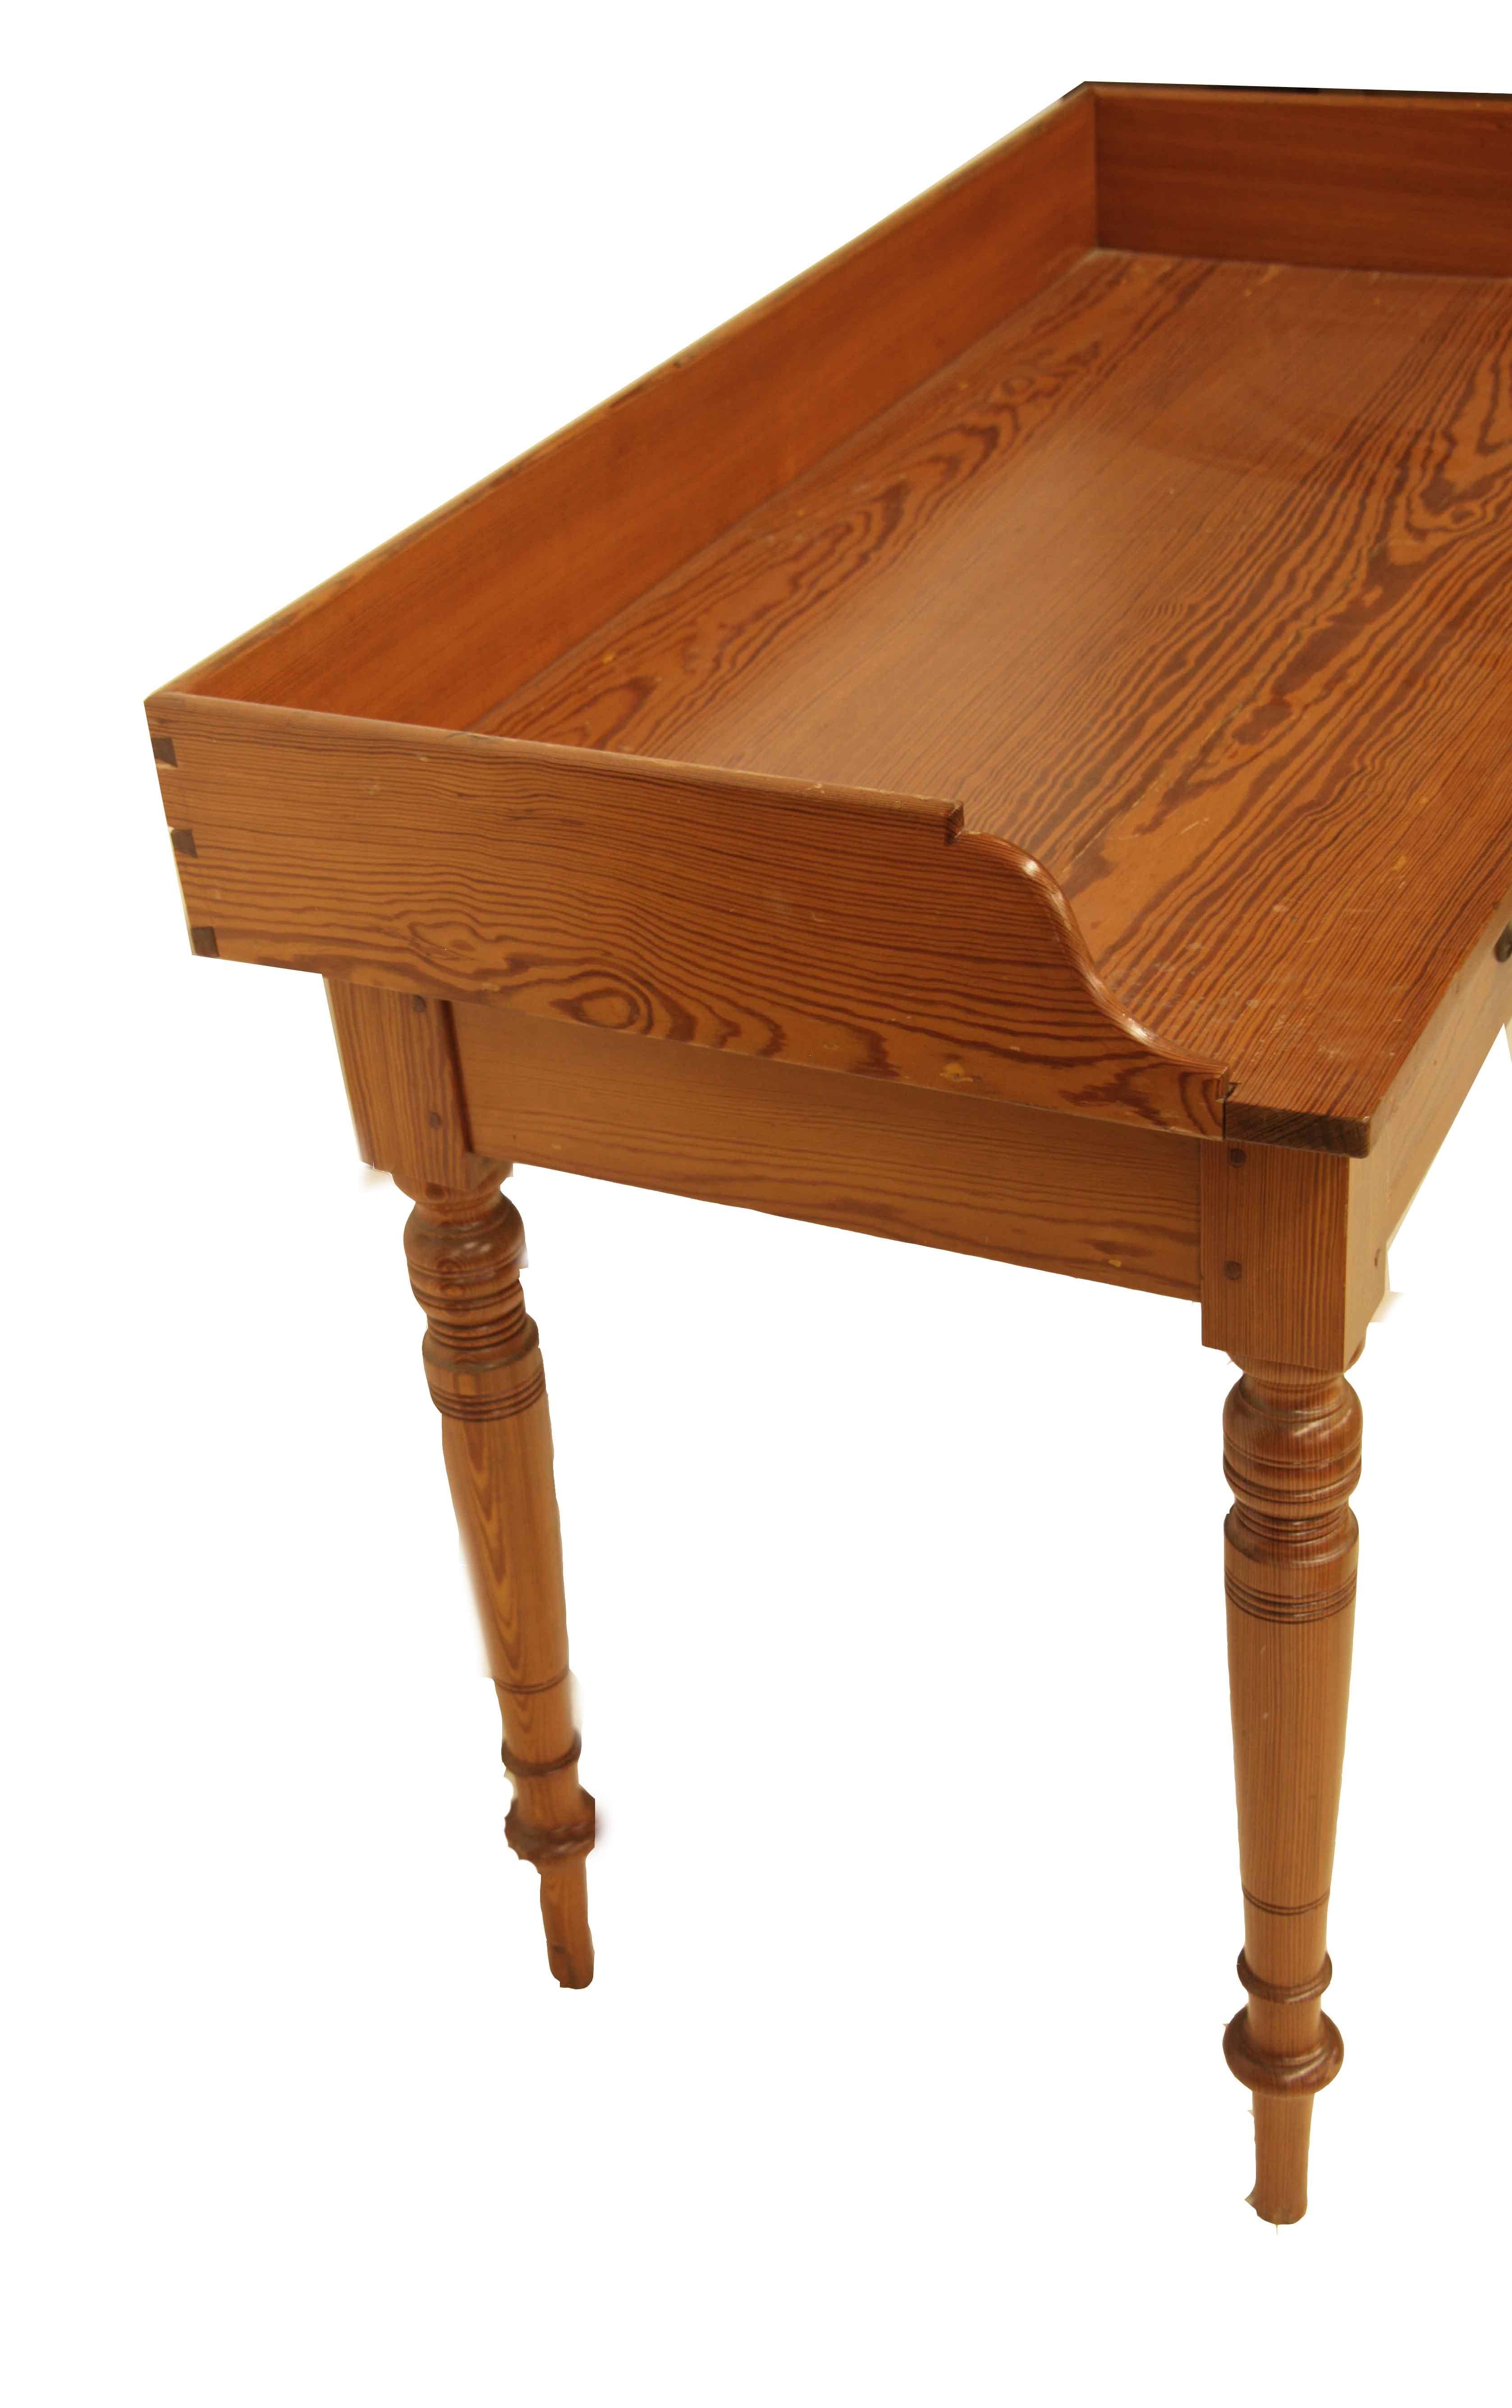 English pine two drawer table in England, they refer to this as ''pitch pine'', here we call it ''heart pine'', by whatever term, it is beautiful wood with bold color and grain. The top has a gallery around the sides and back, two drawers with solid